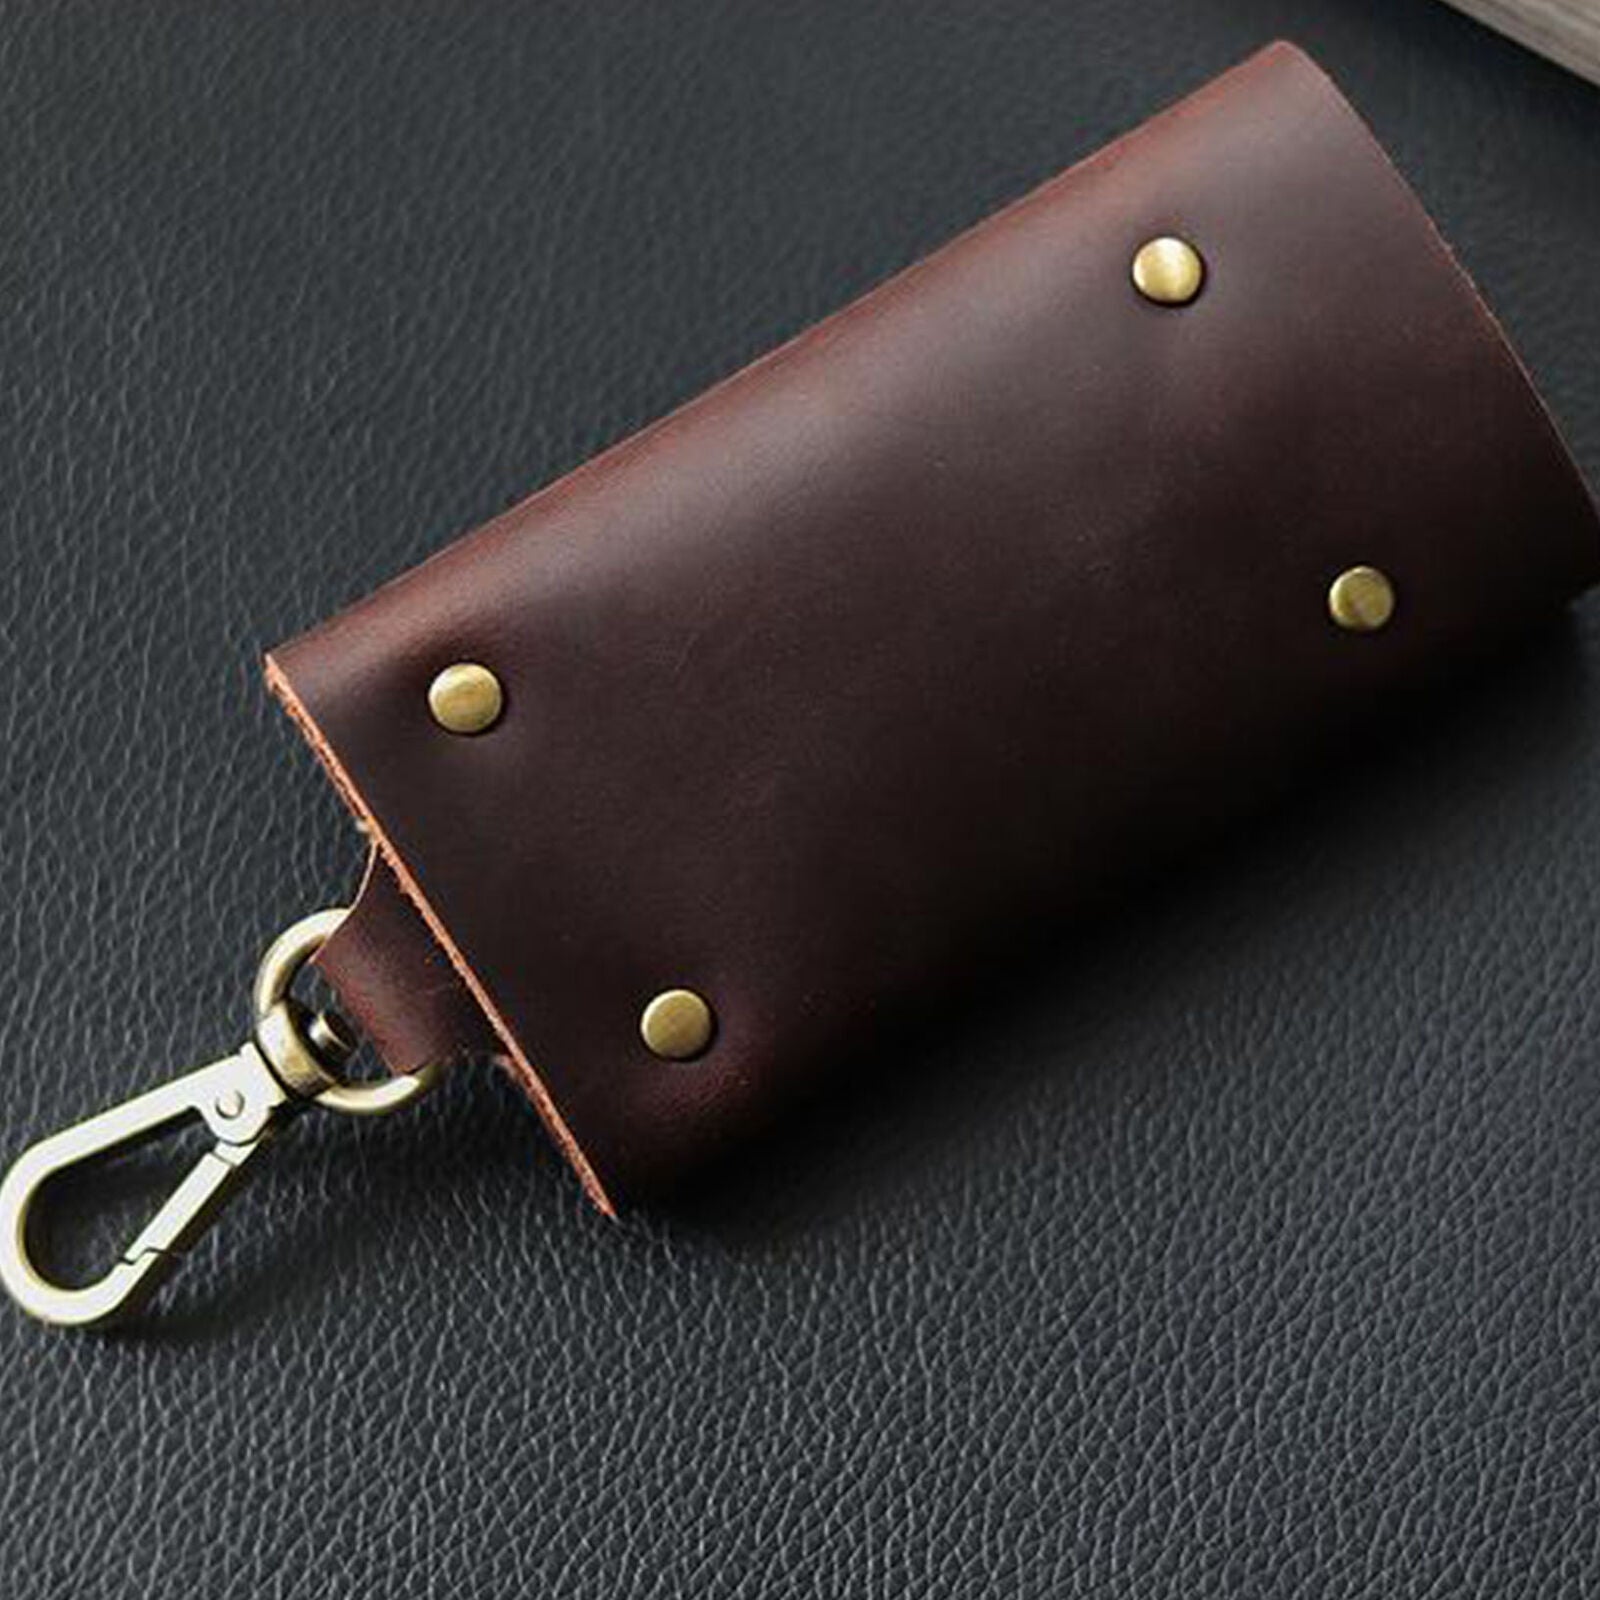 Leather Car Key Chain Ring Keys Holder Pouch Case Wallet